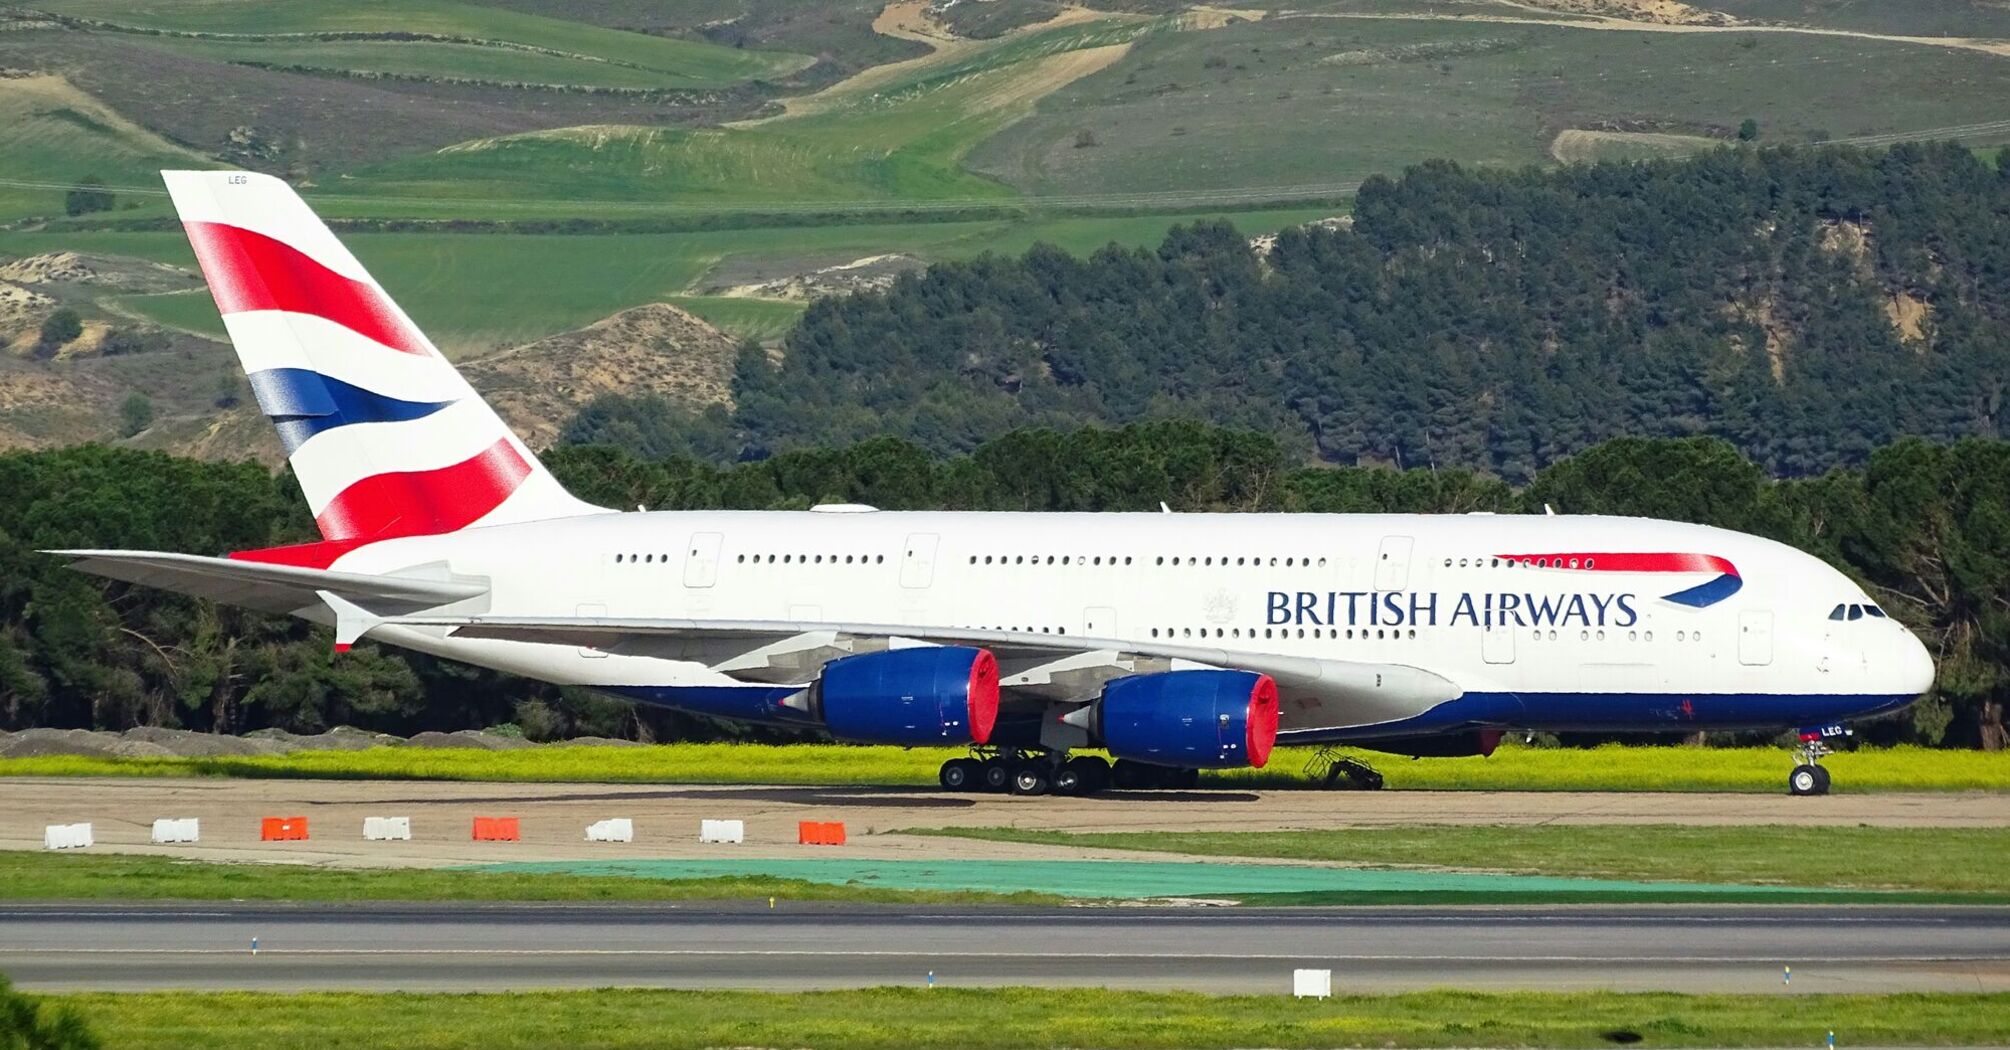 A British Airways aircraft on the runway with the company's signature red, white, and blue livery on the tail 